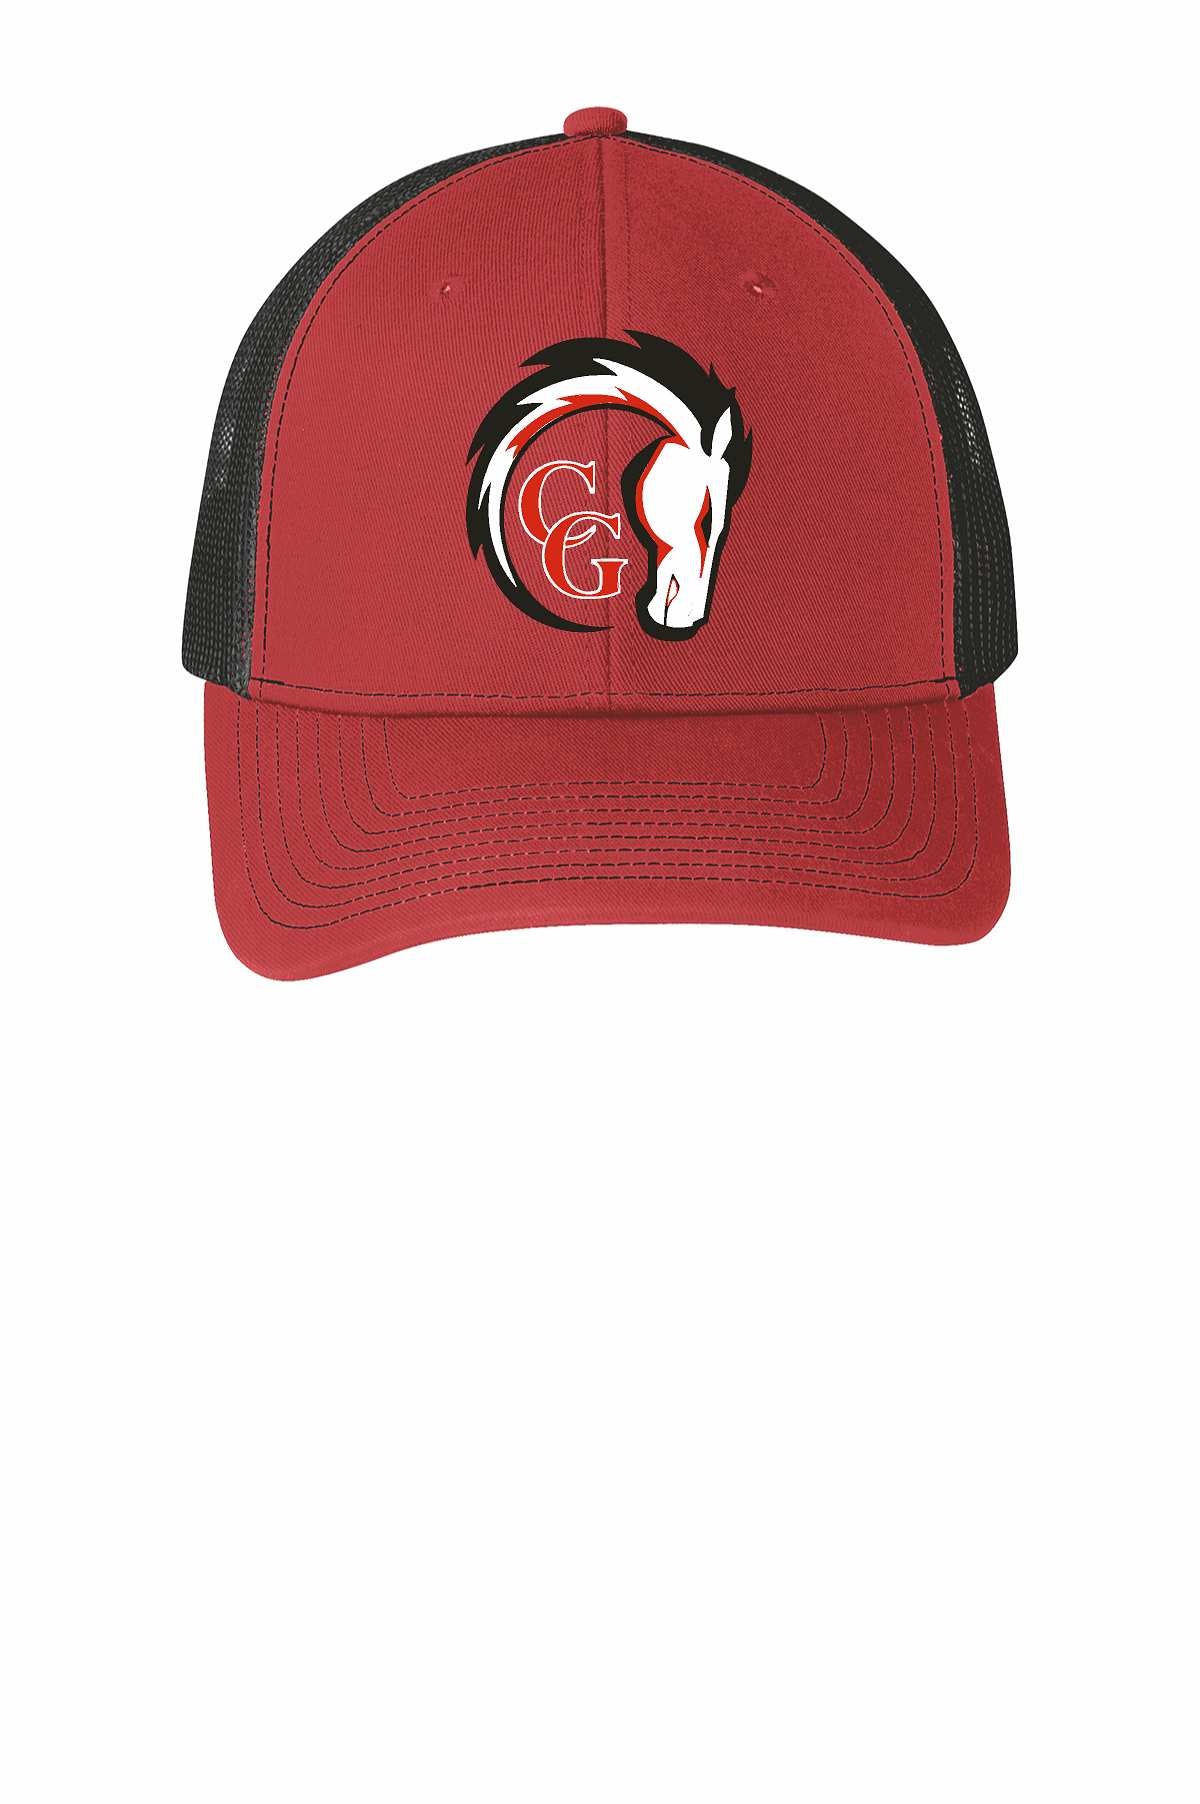 CG Chargers Red/Black Embroidered Richardson 112 cap